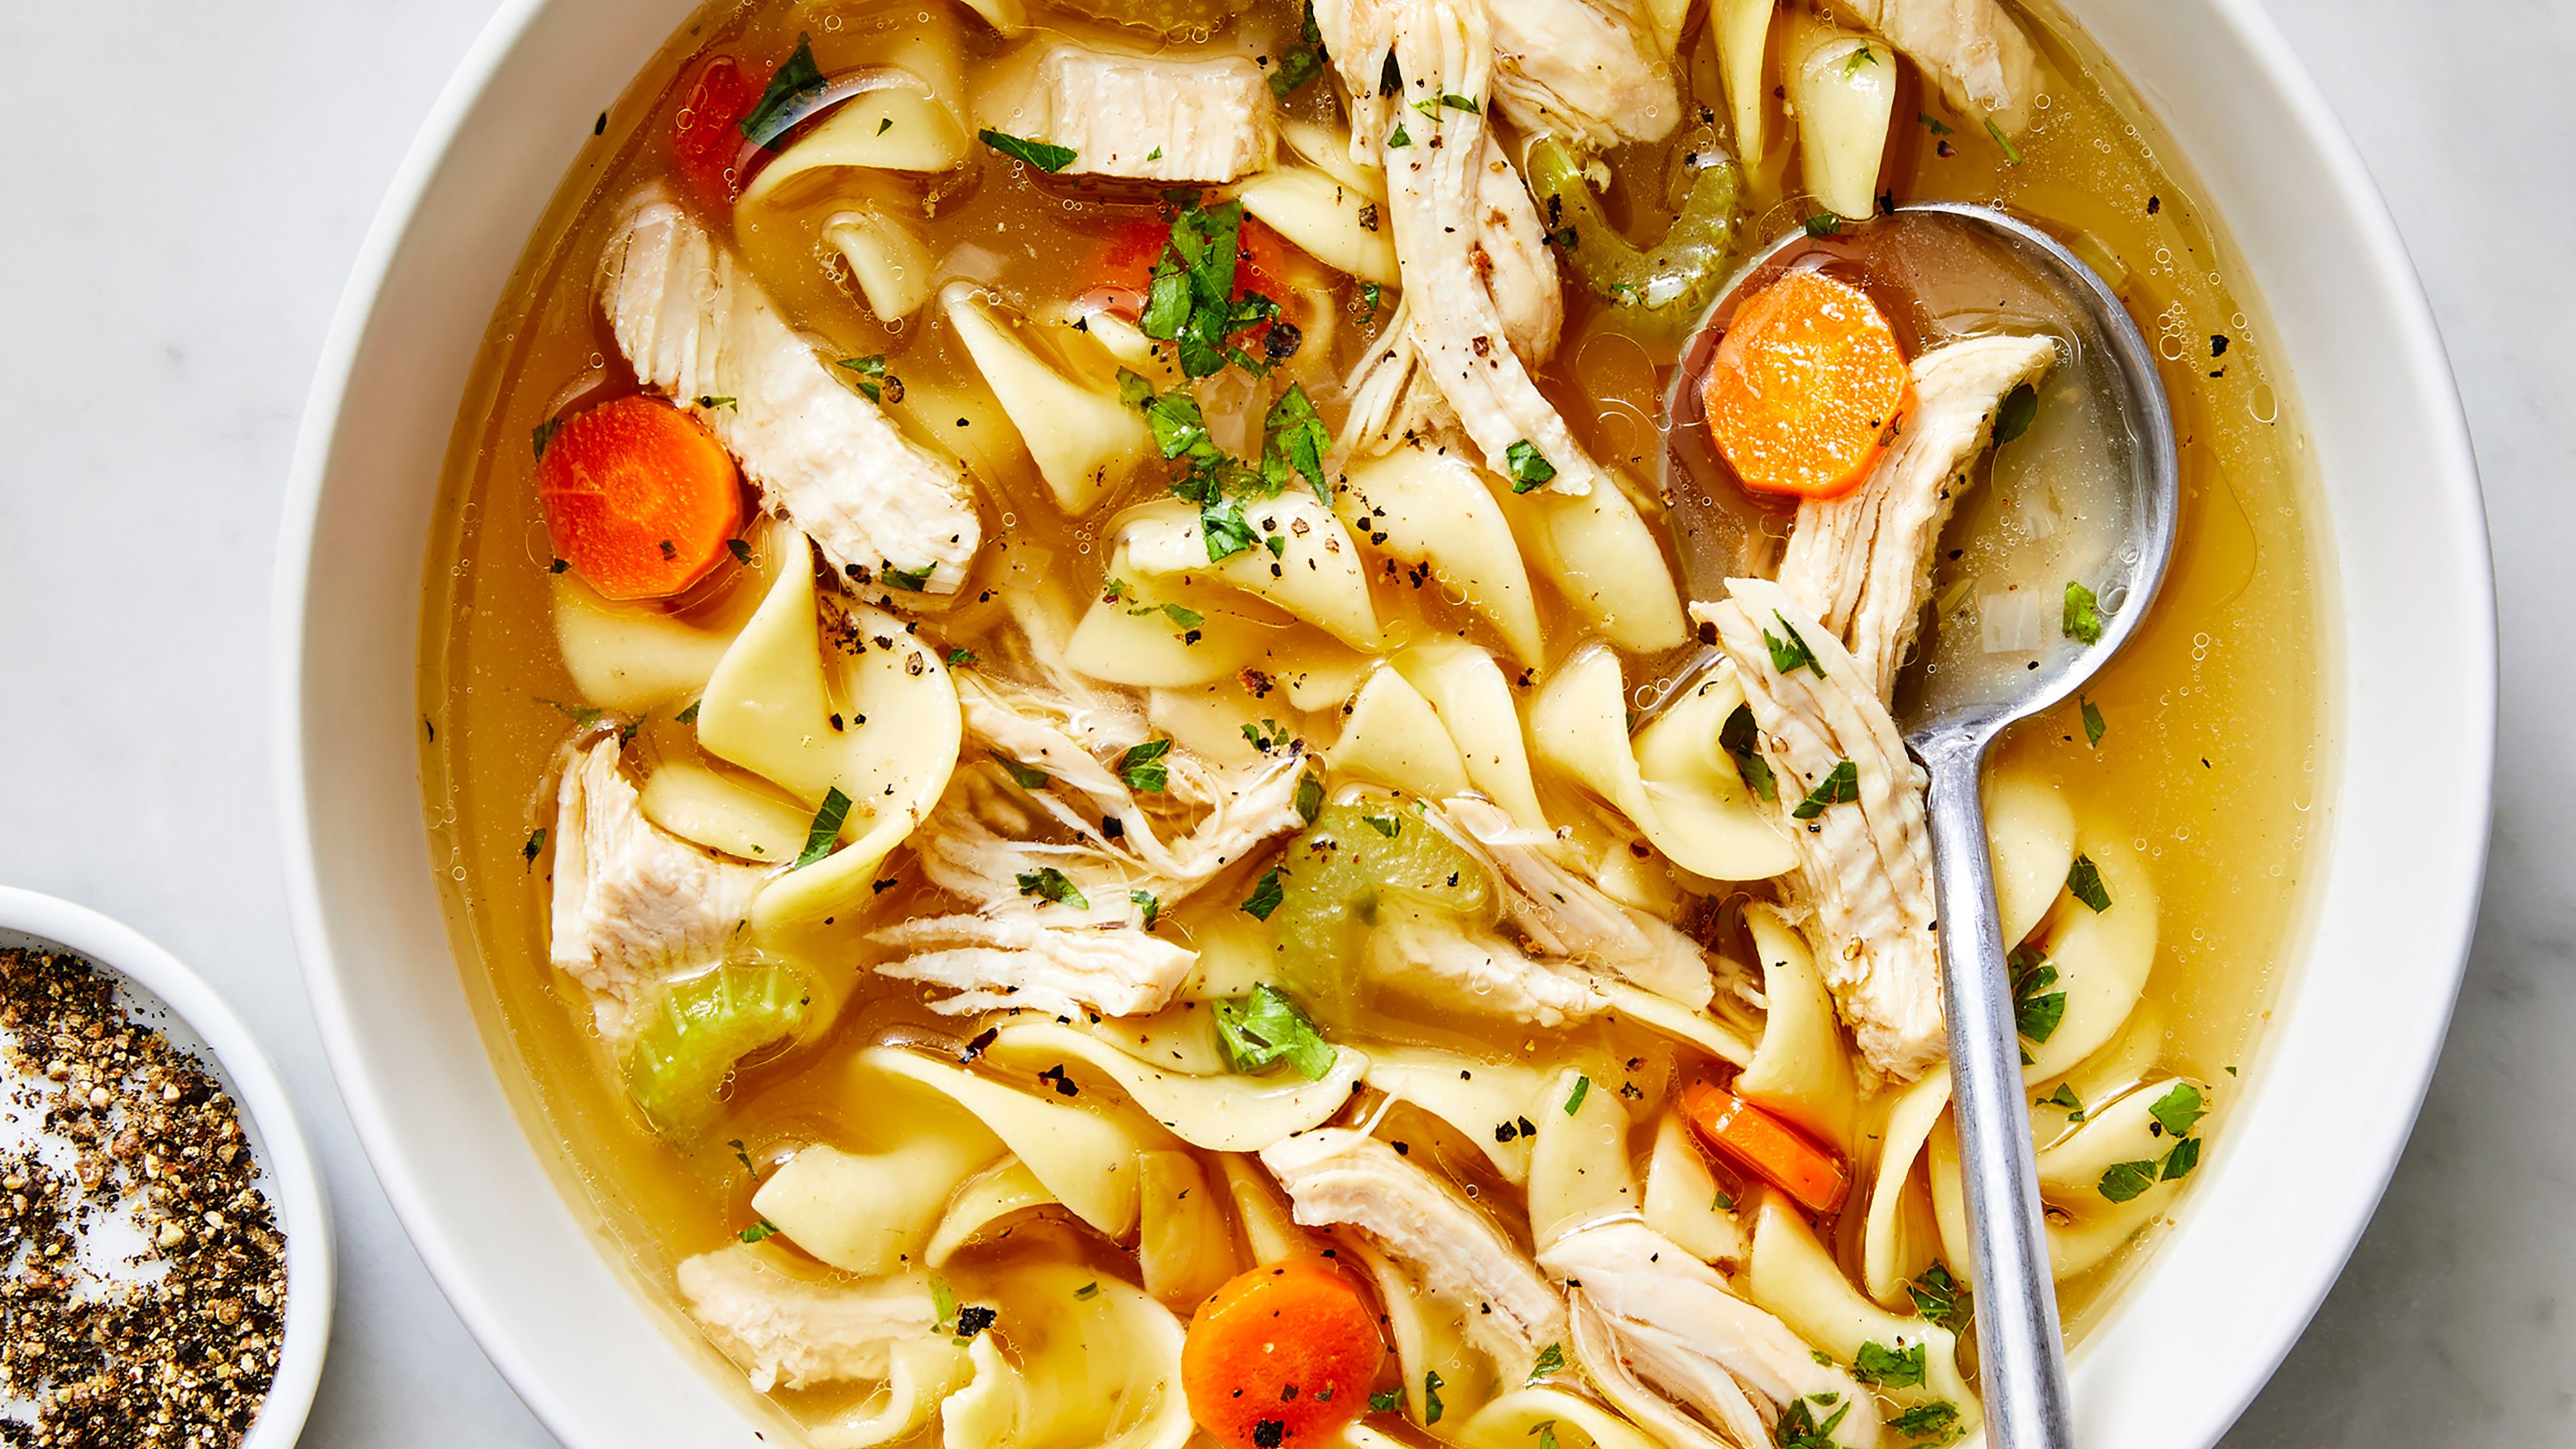 Best Chicken Noodle Soup Recipe - How To Make Chicken Noodle Soup